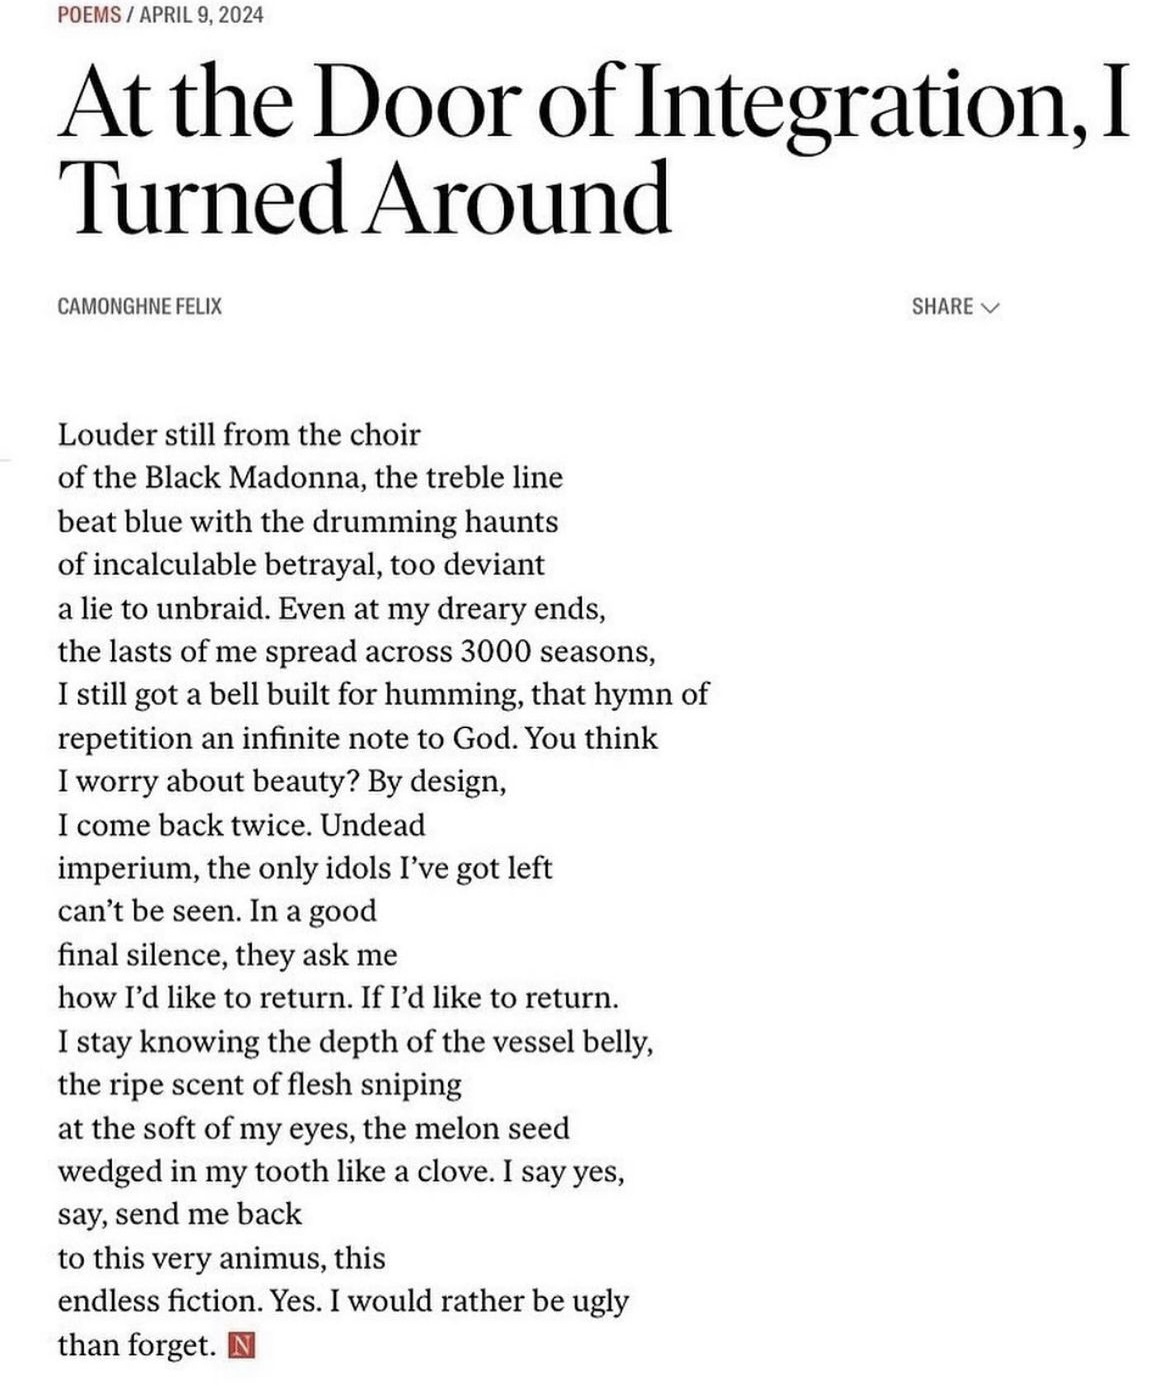 At the Door of Integration, I turned around, by Camonghne Felix